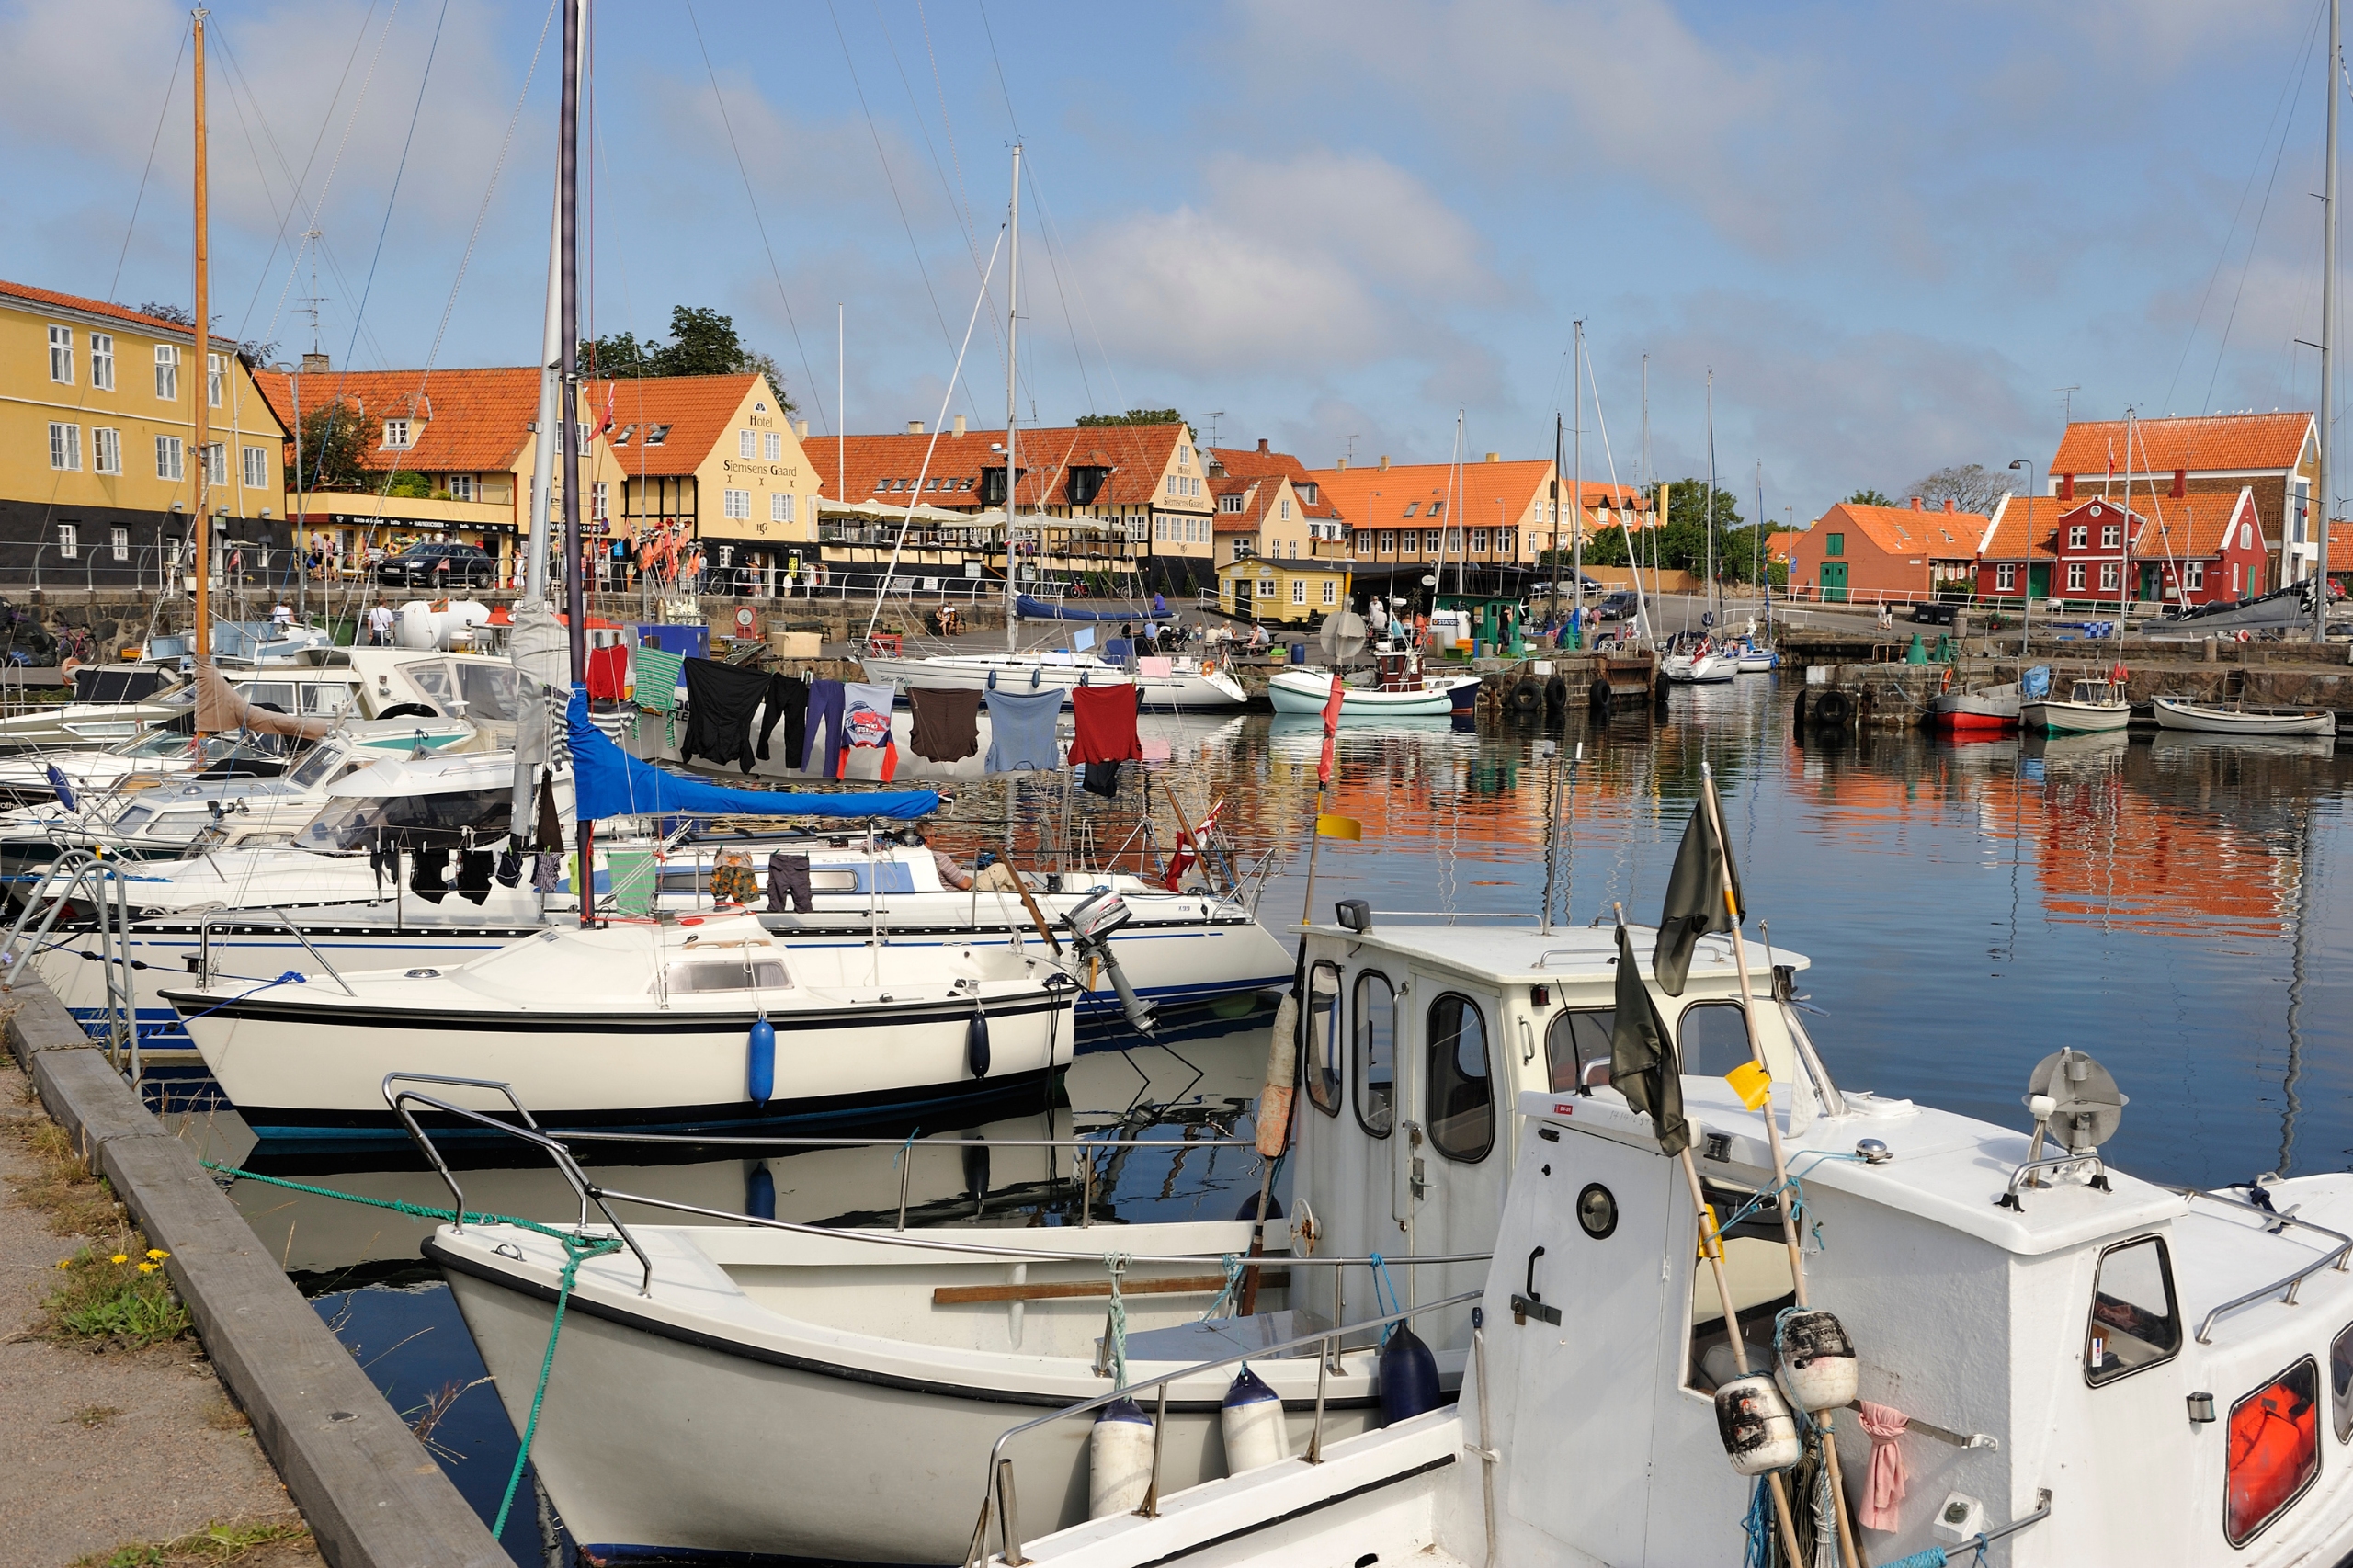 The small town of Svaneke is a nice stop during your camping holiday on Bornholm.